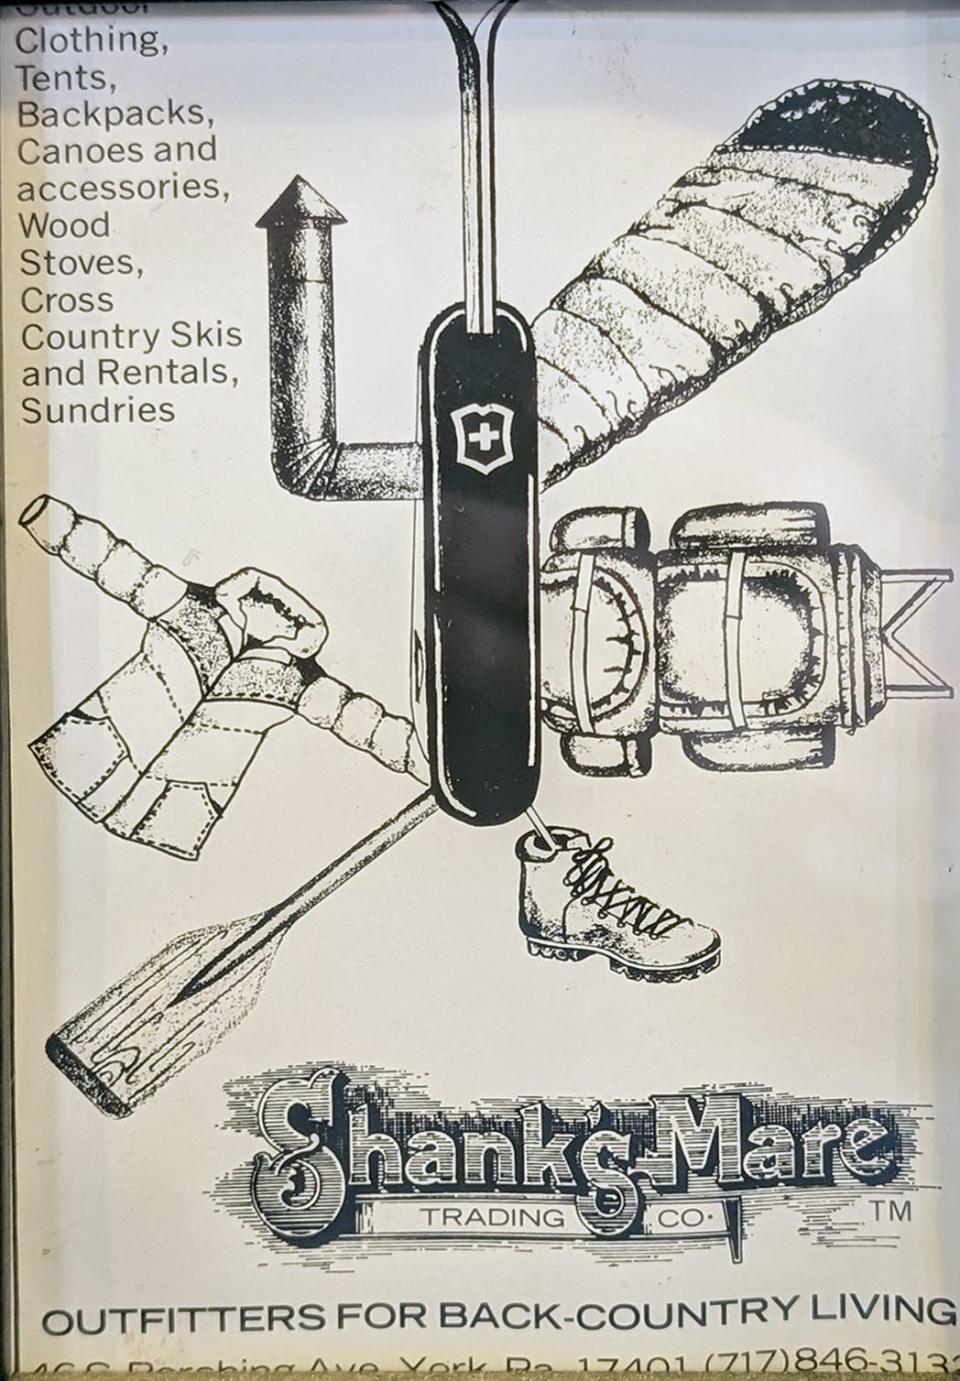 The first ad created for Shank's Mare.